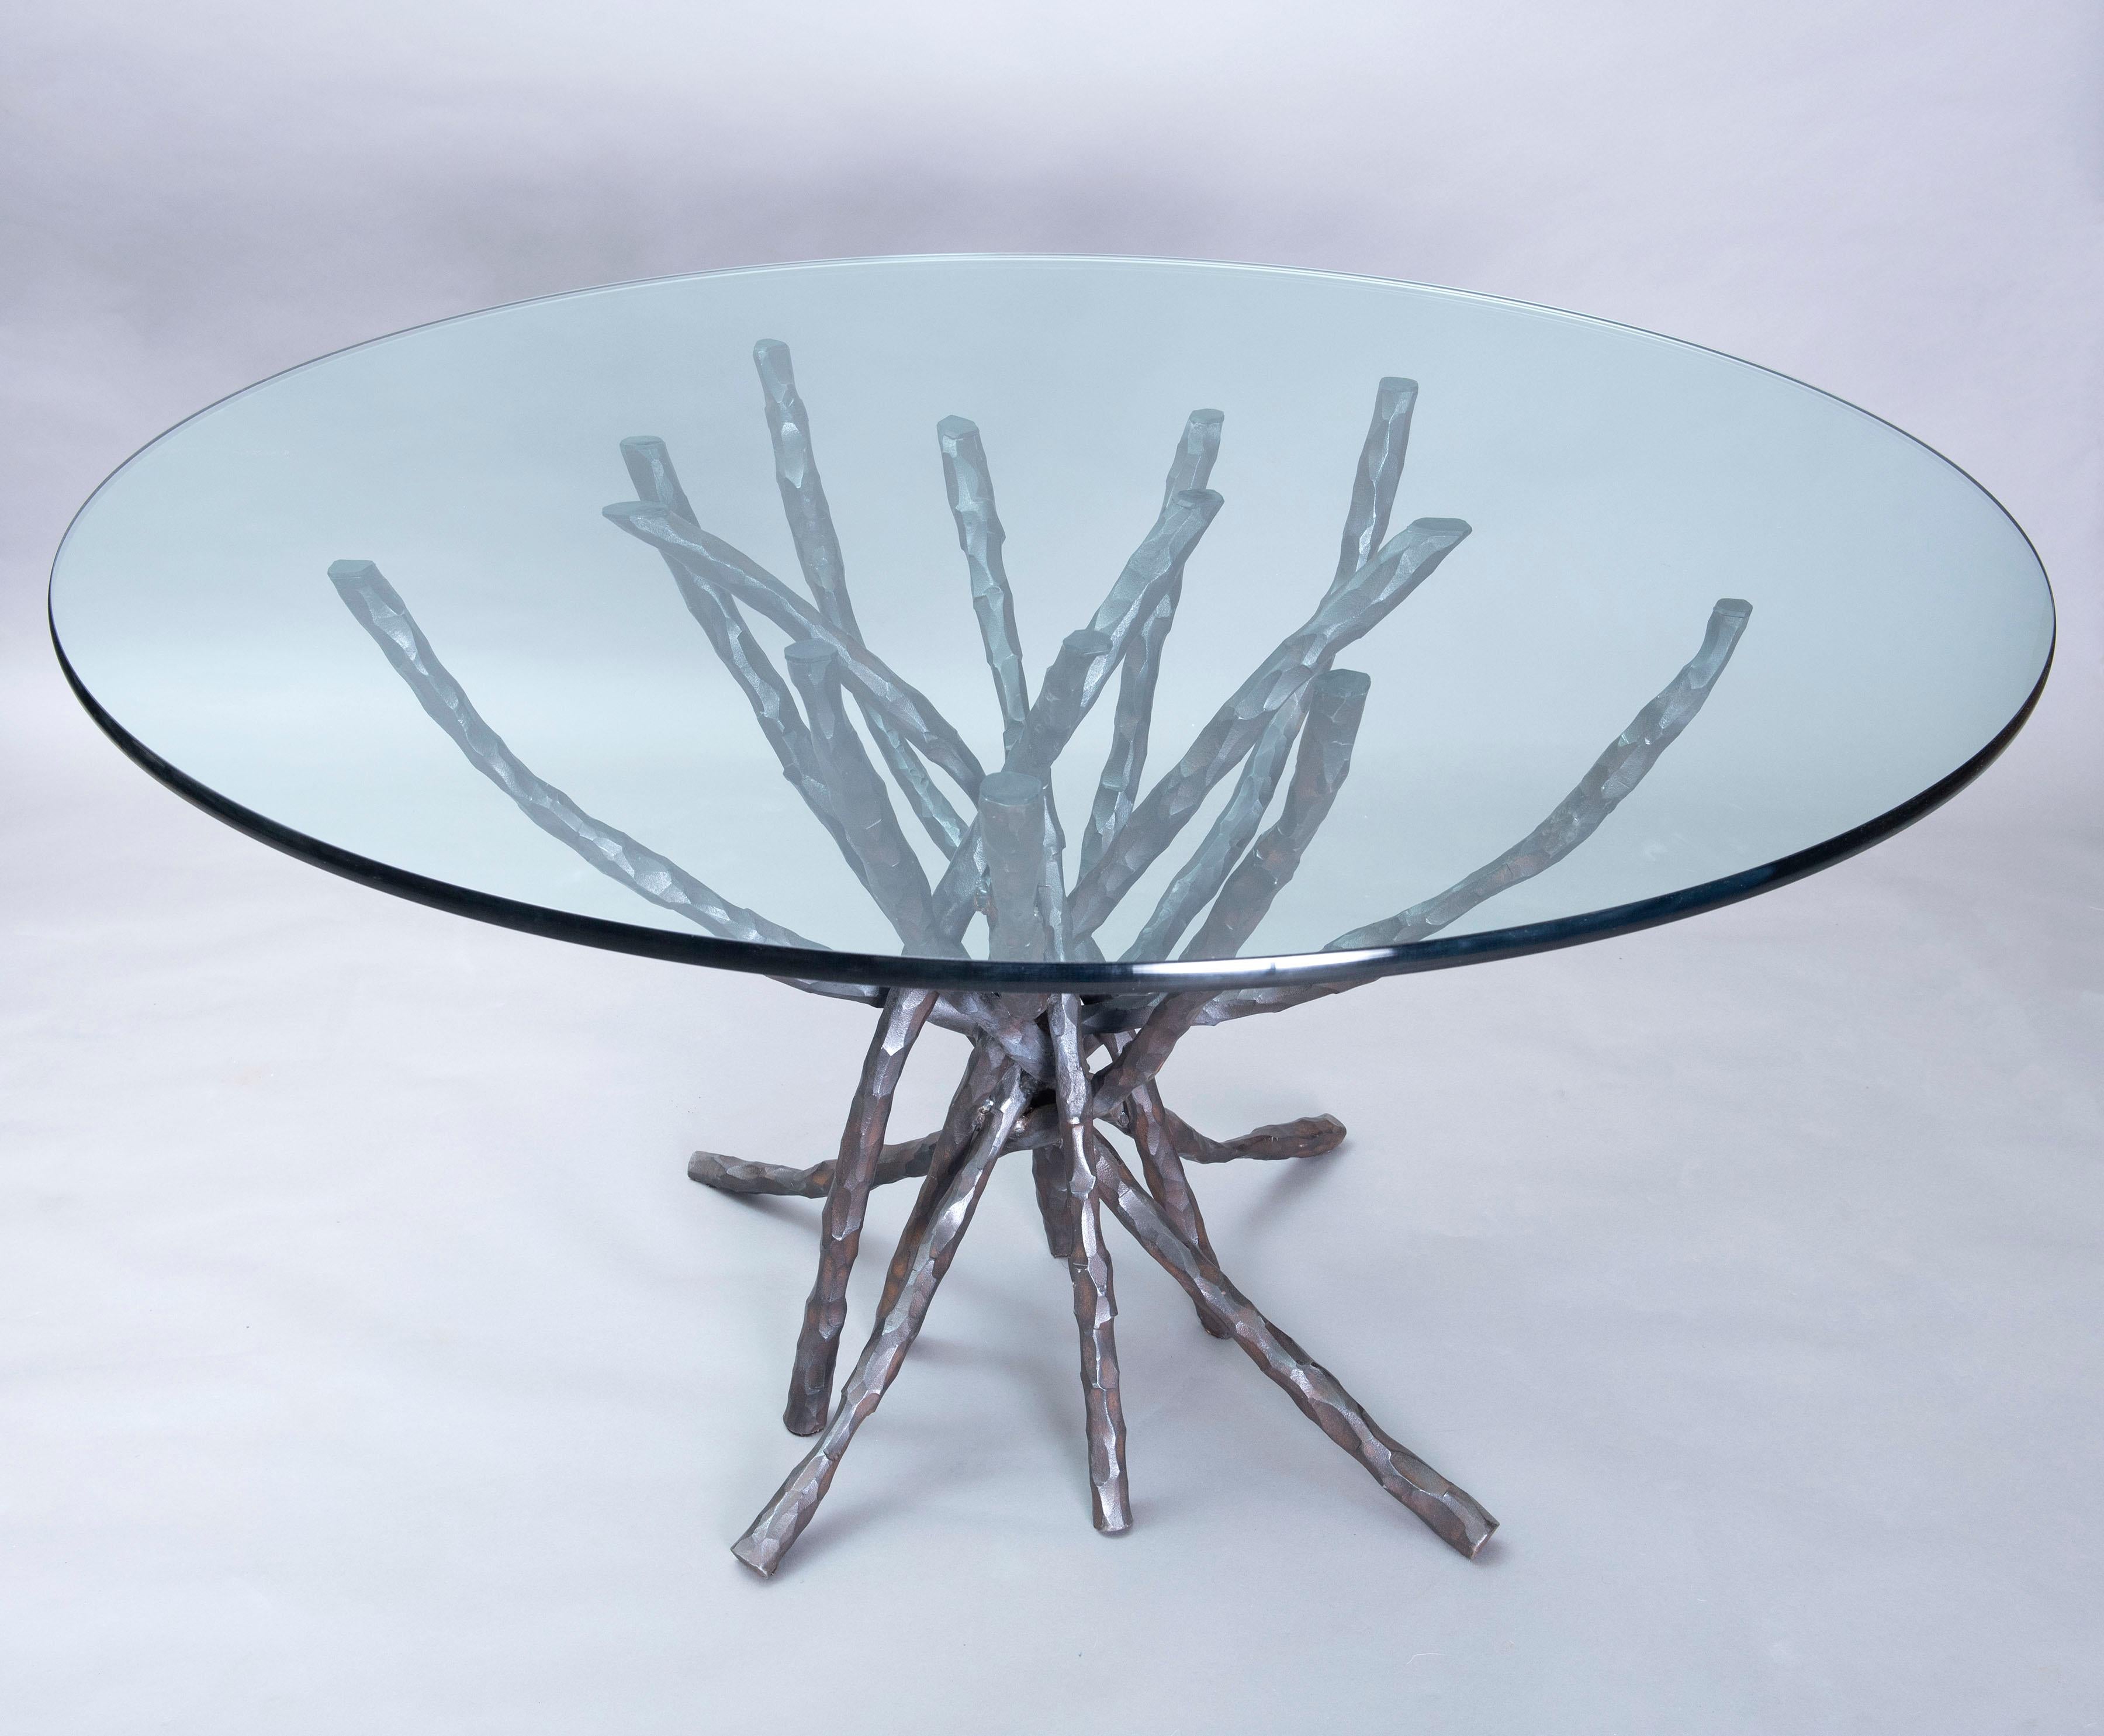 Organic Modern Hammered Iron & Glass Dining Table Table One Of A Kind Sculptural Brutalist  For Sale